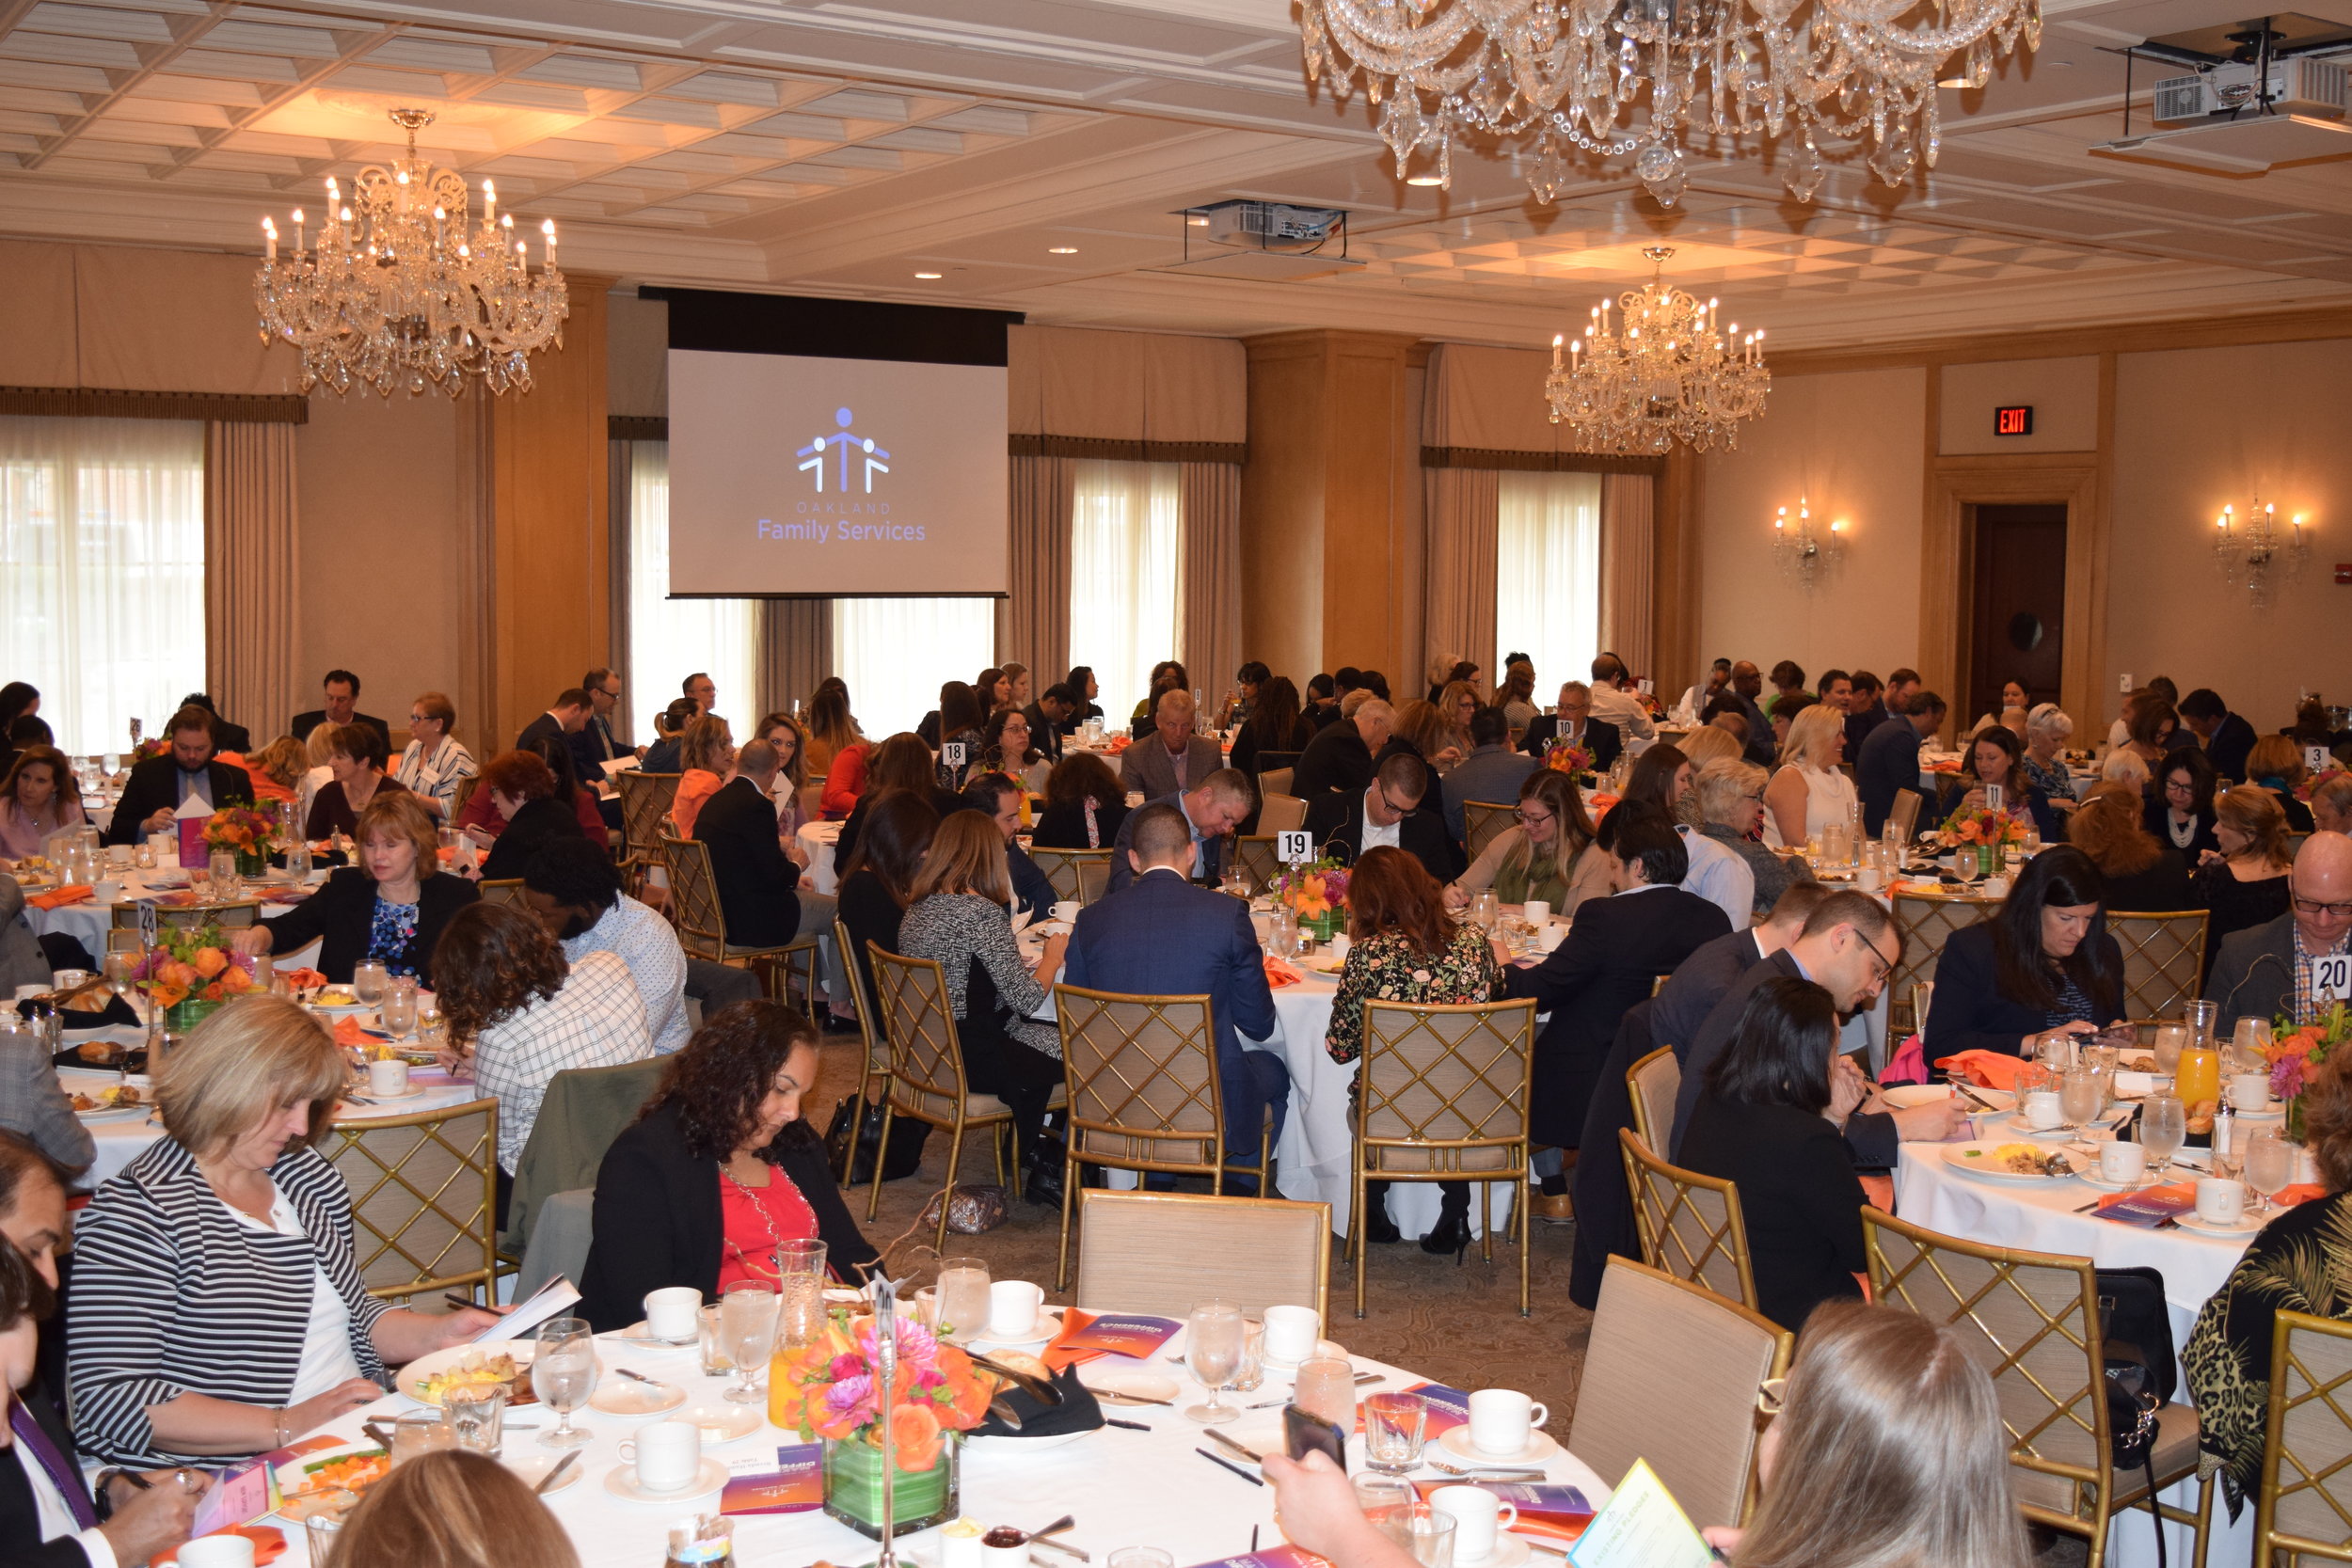 More than 300 people attended the Building a Brighter Future Breakfast.